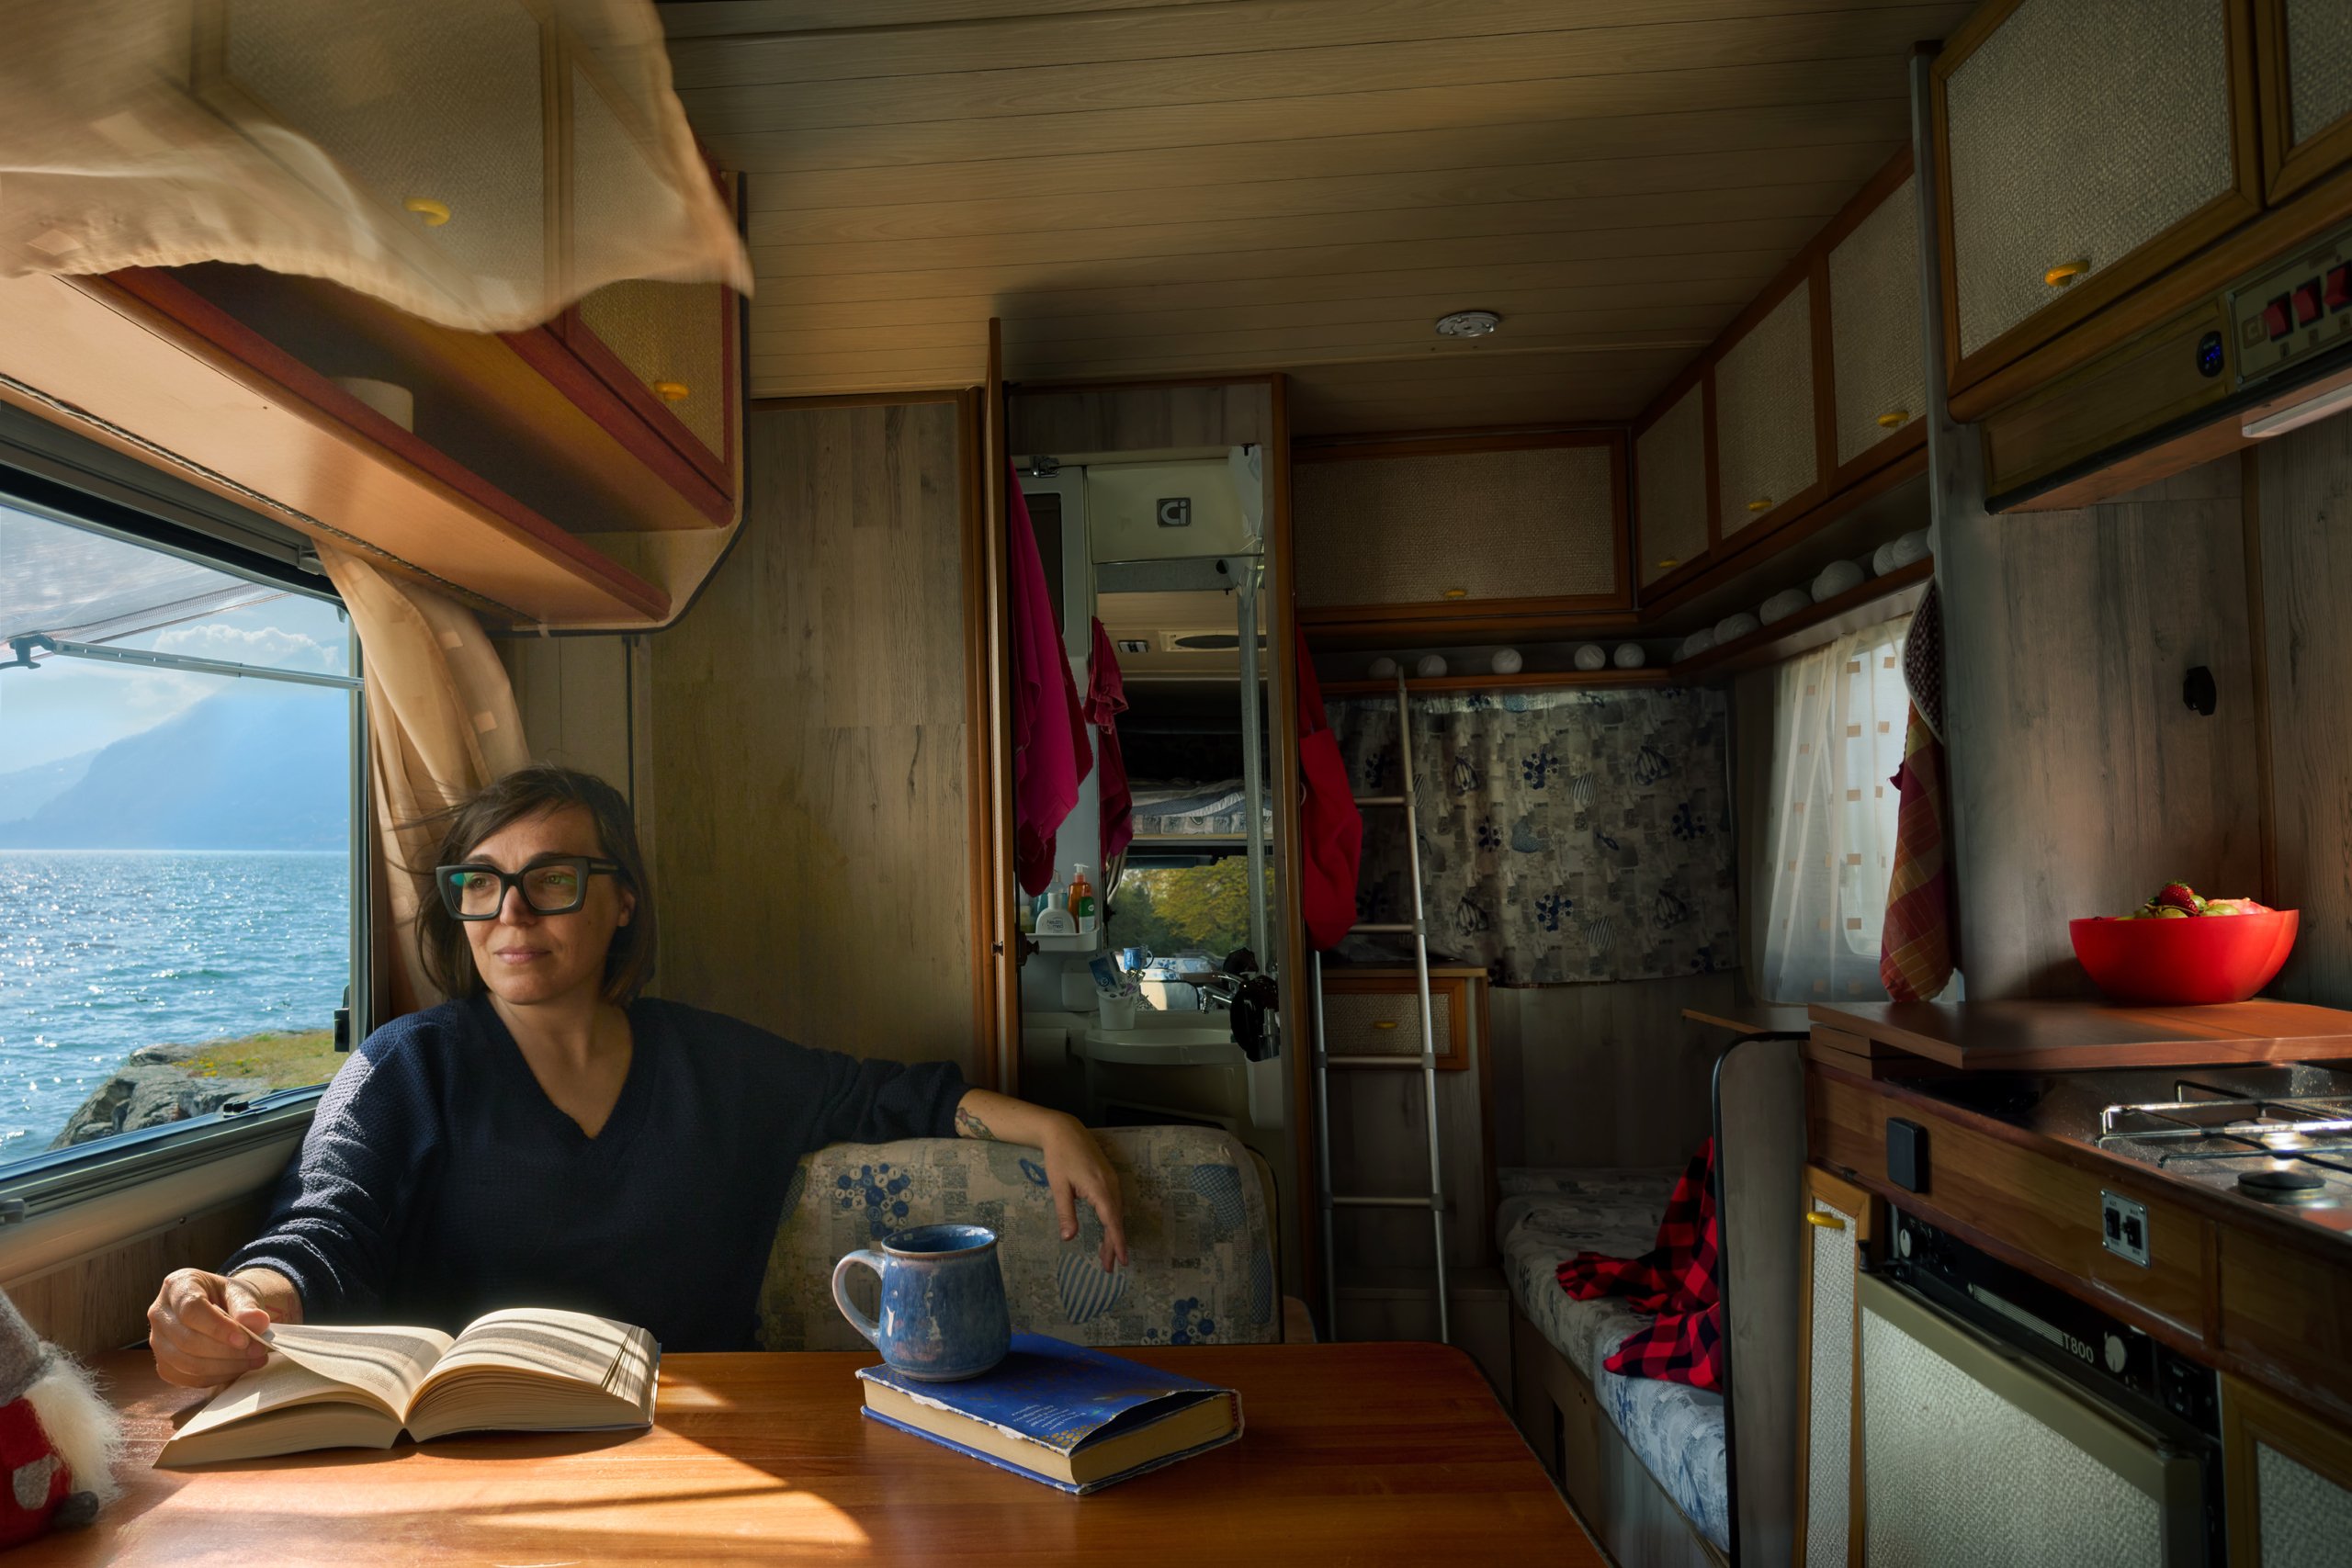 Sharon sitting by the table in her camper looking out at the ocean through the window.